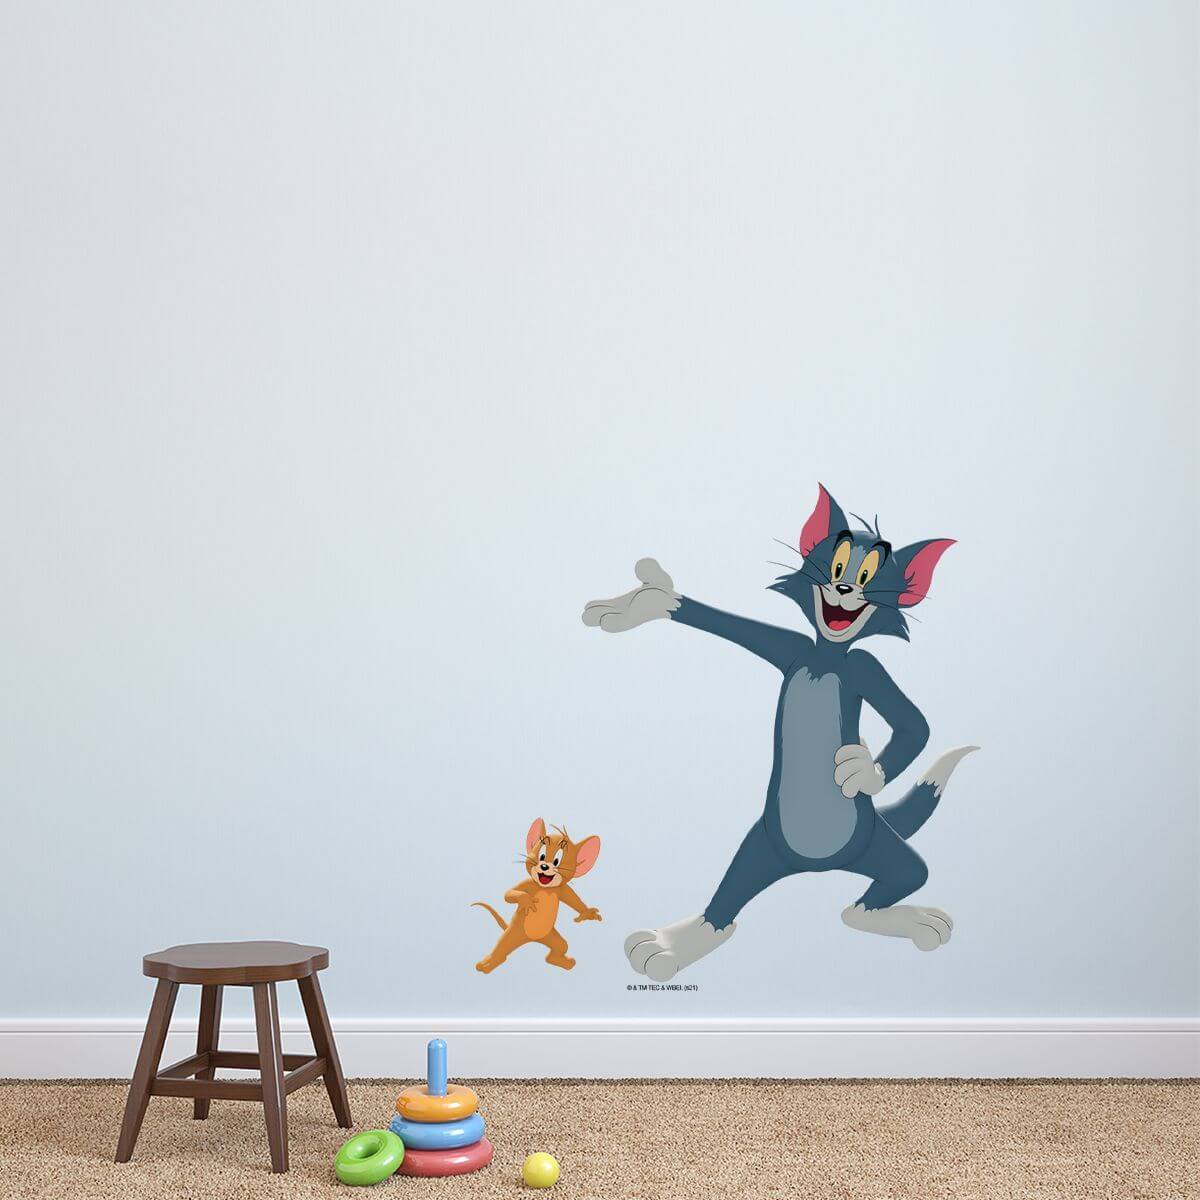 Kismet Decals Tom & Jerry: Welcome! Licensed Wall Sticker - Easy DIY Home & Room Decor Cartoon Wall Art - Kismet Decals